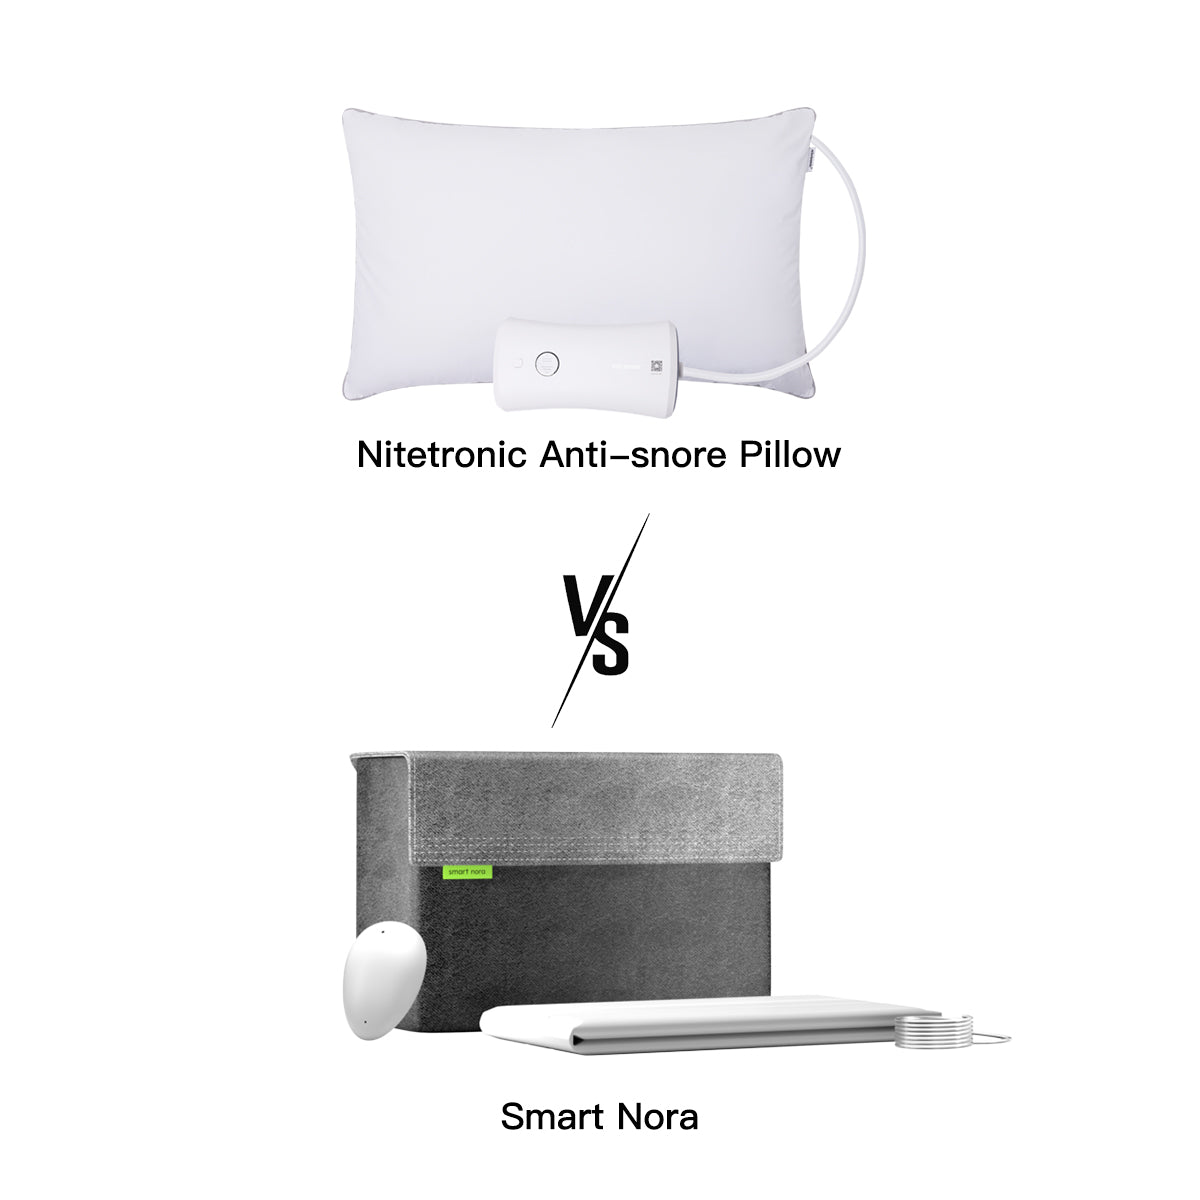 Comparing the Nitetronic Z6 smart anti-snore pillow and Smart Nora